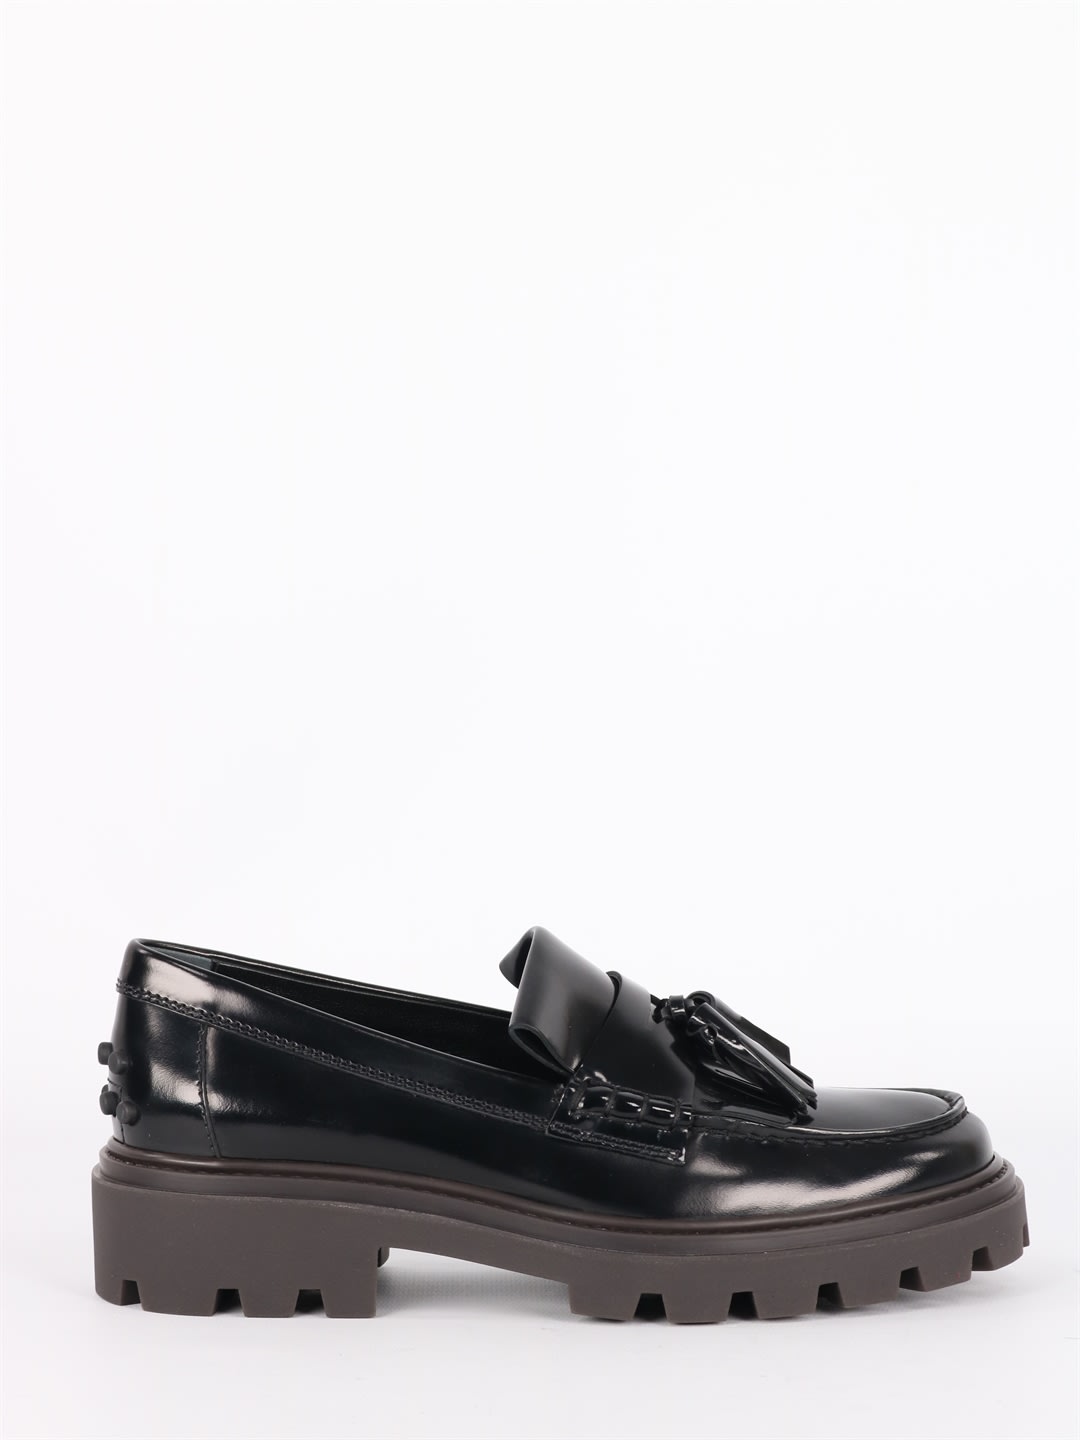 Tods Black Moccasin With Tassels